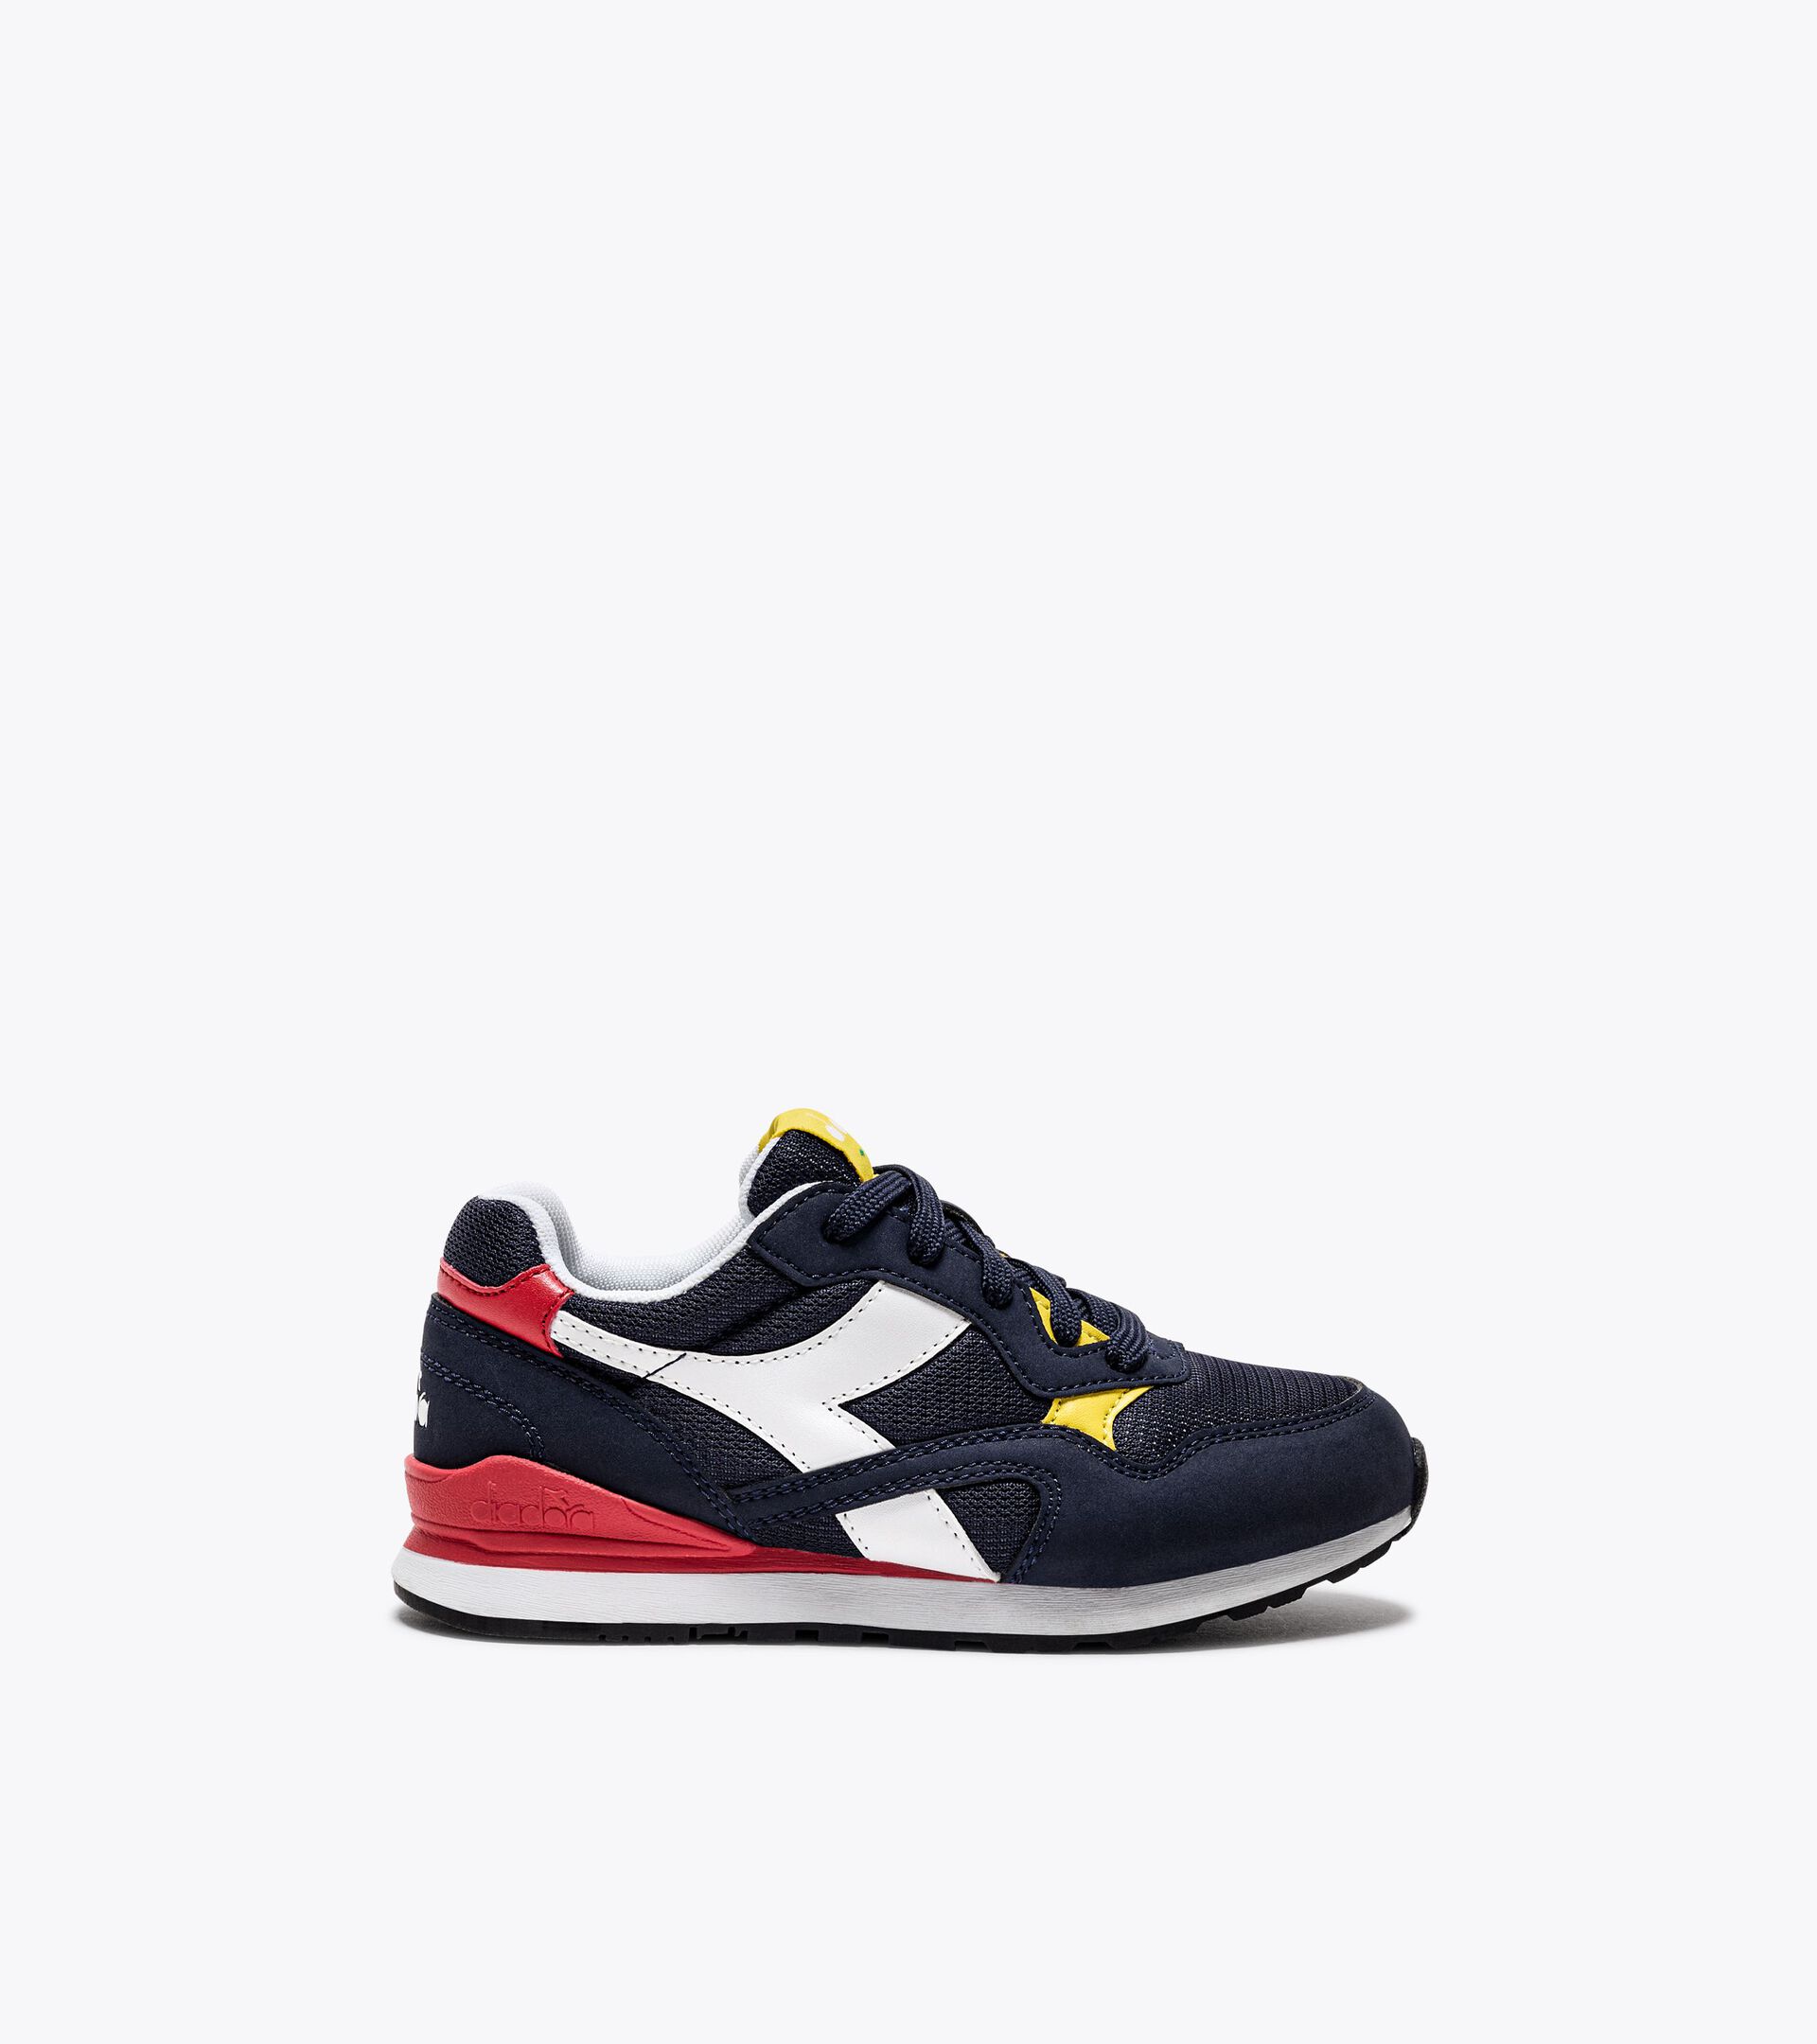 N.92 PS Sports shoes - Kids 4-8 years - Diadora Online Store RS